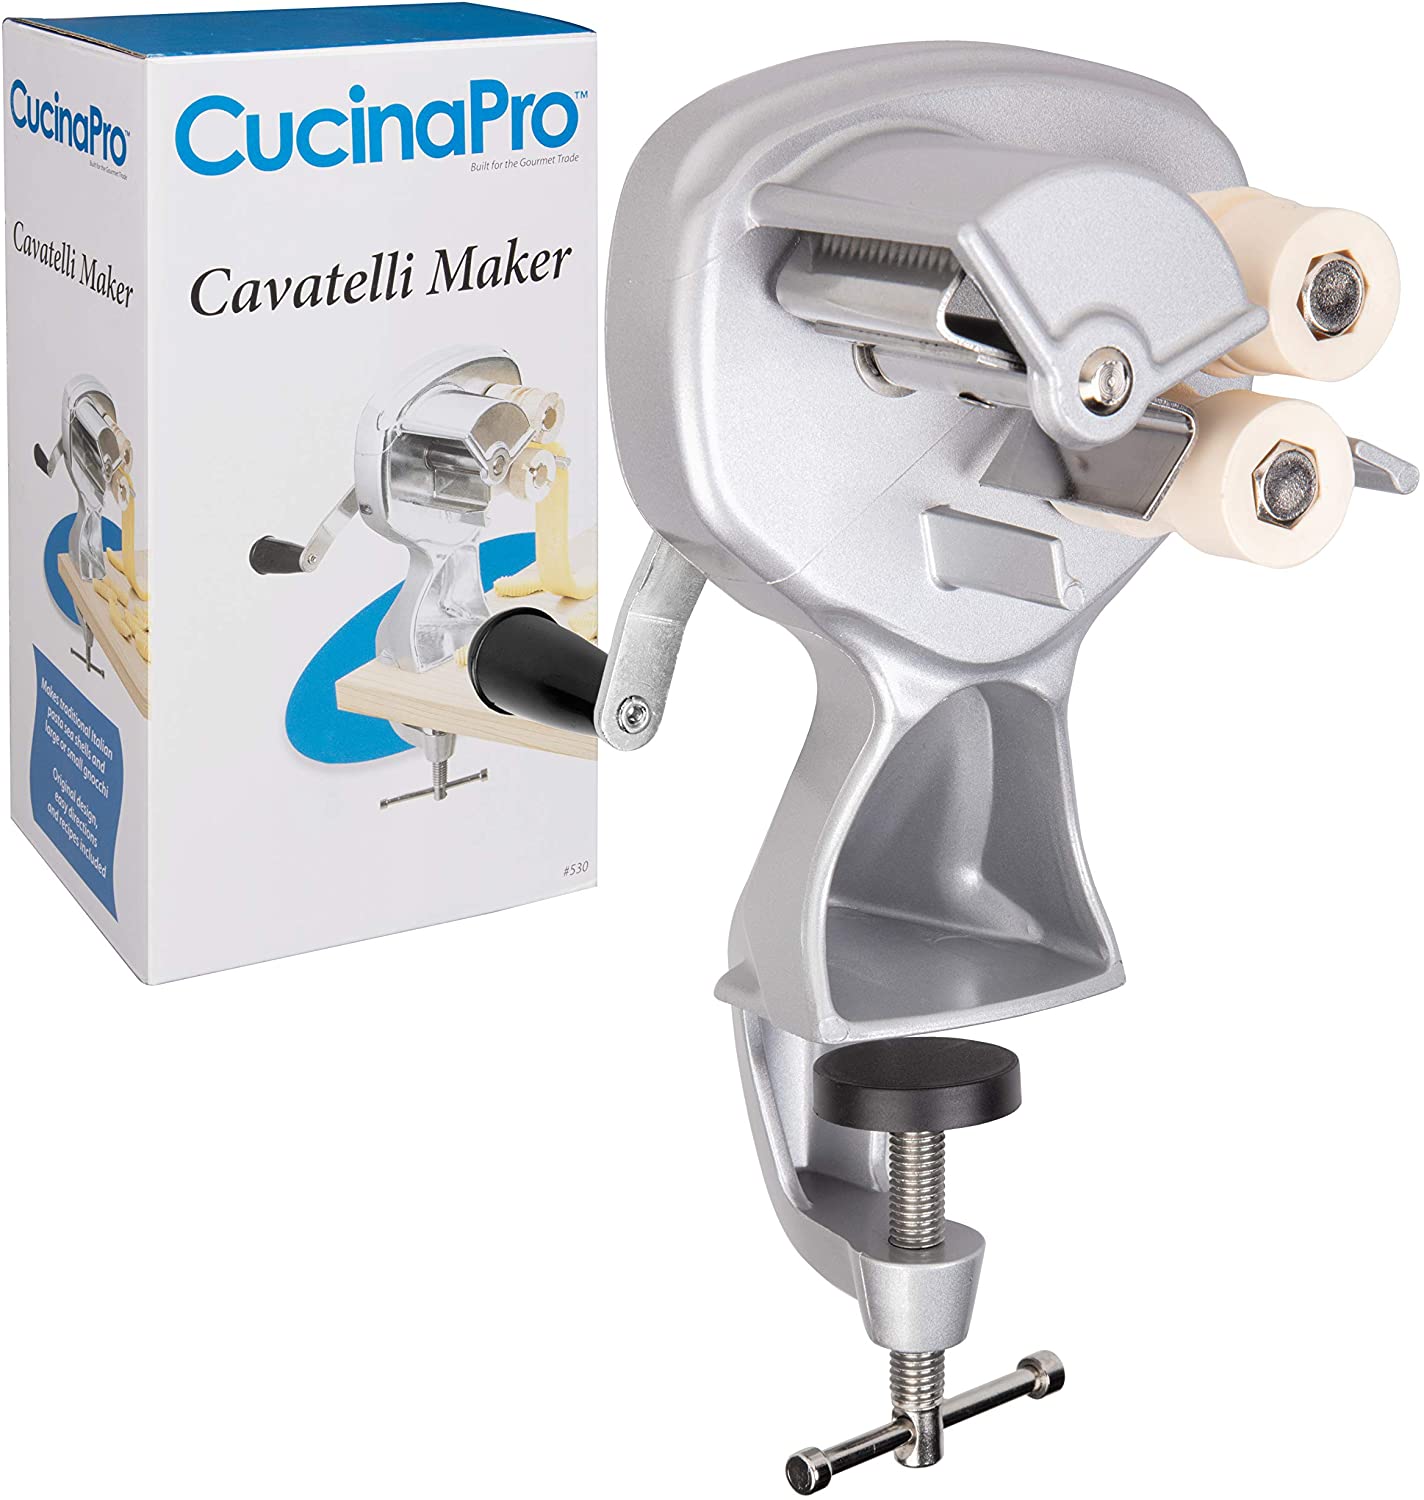 CucinaPro Cavatelli Maker Machine w Easy Clean Rollers- Makes